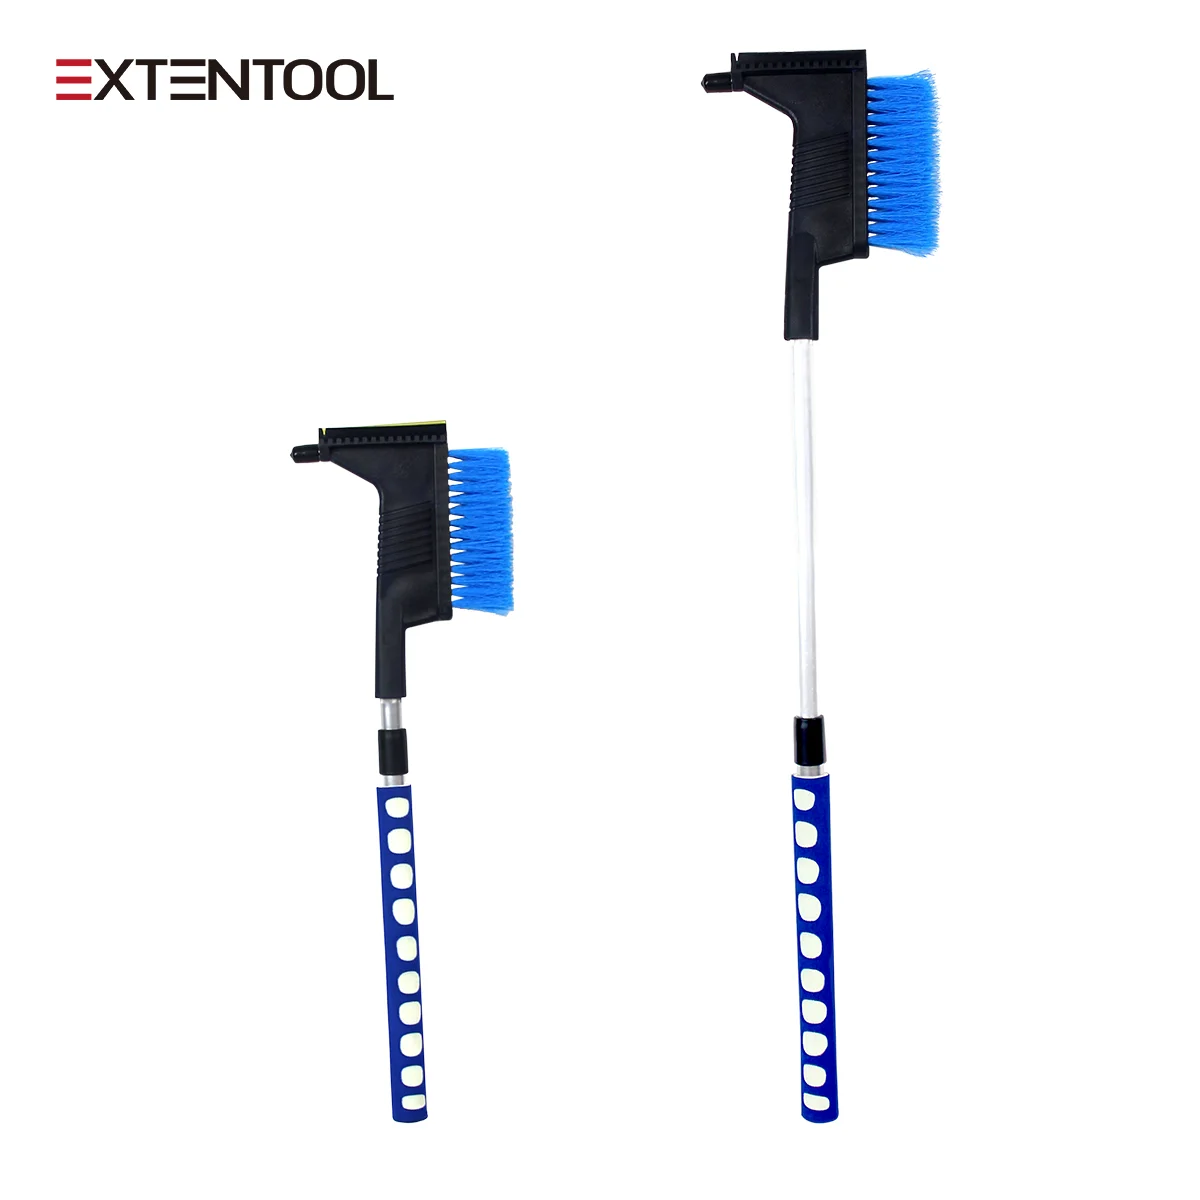 Exten-hiclean car roof snow rake with extension handle short handle removal rake Amazon hot sale